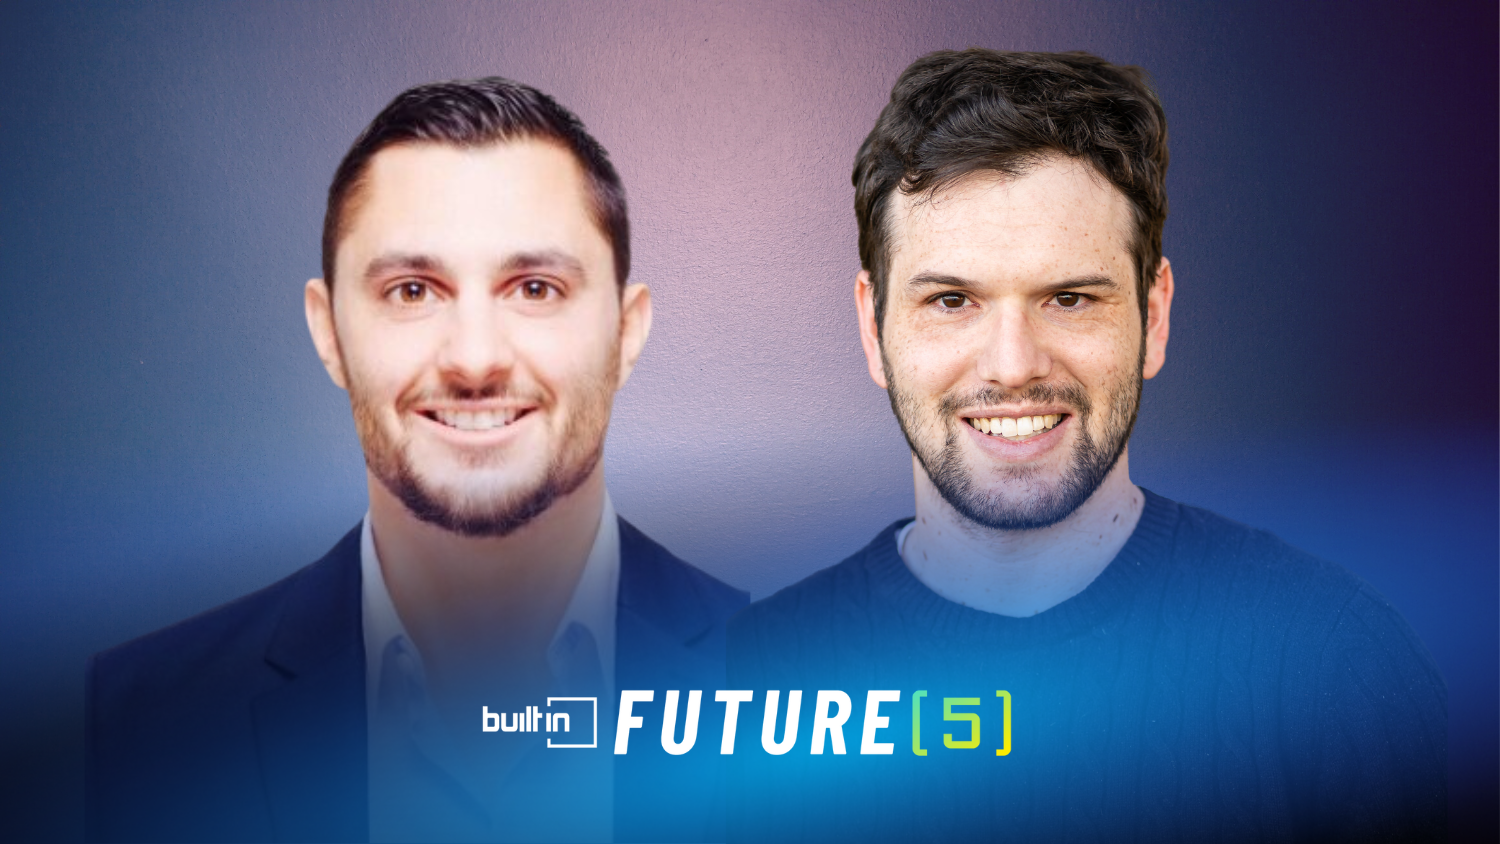 Plural was co-founded by CEO Sam Weaver (left) and CTO Michael Guarino (right). They are pictured against a colored background with the Built In Future 5 logo.